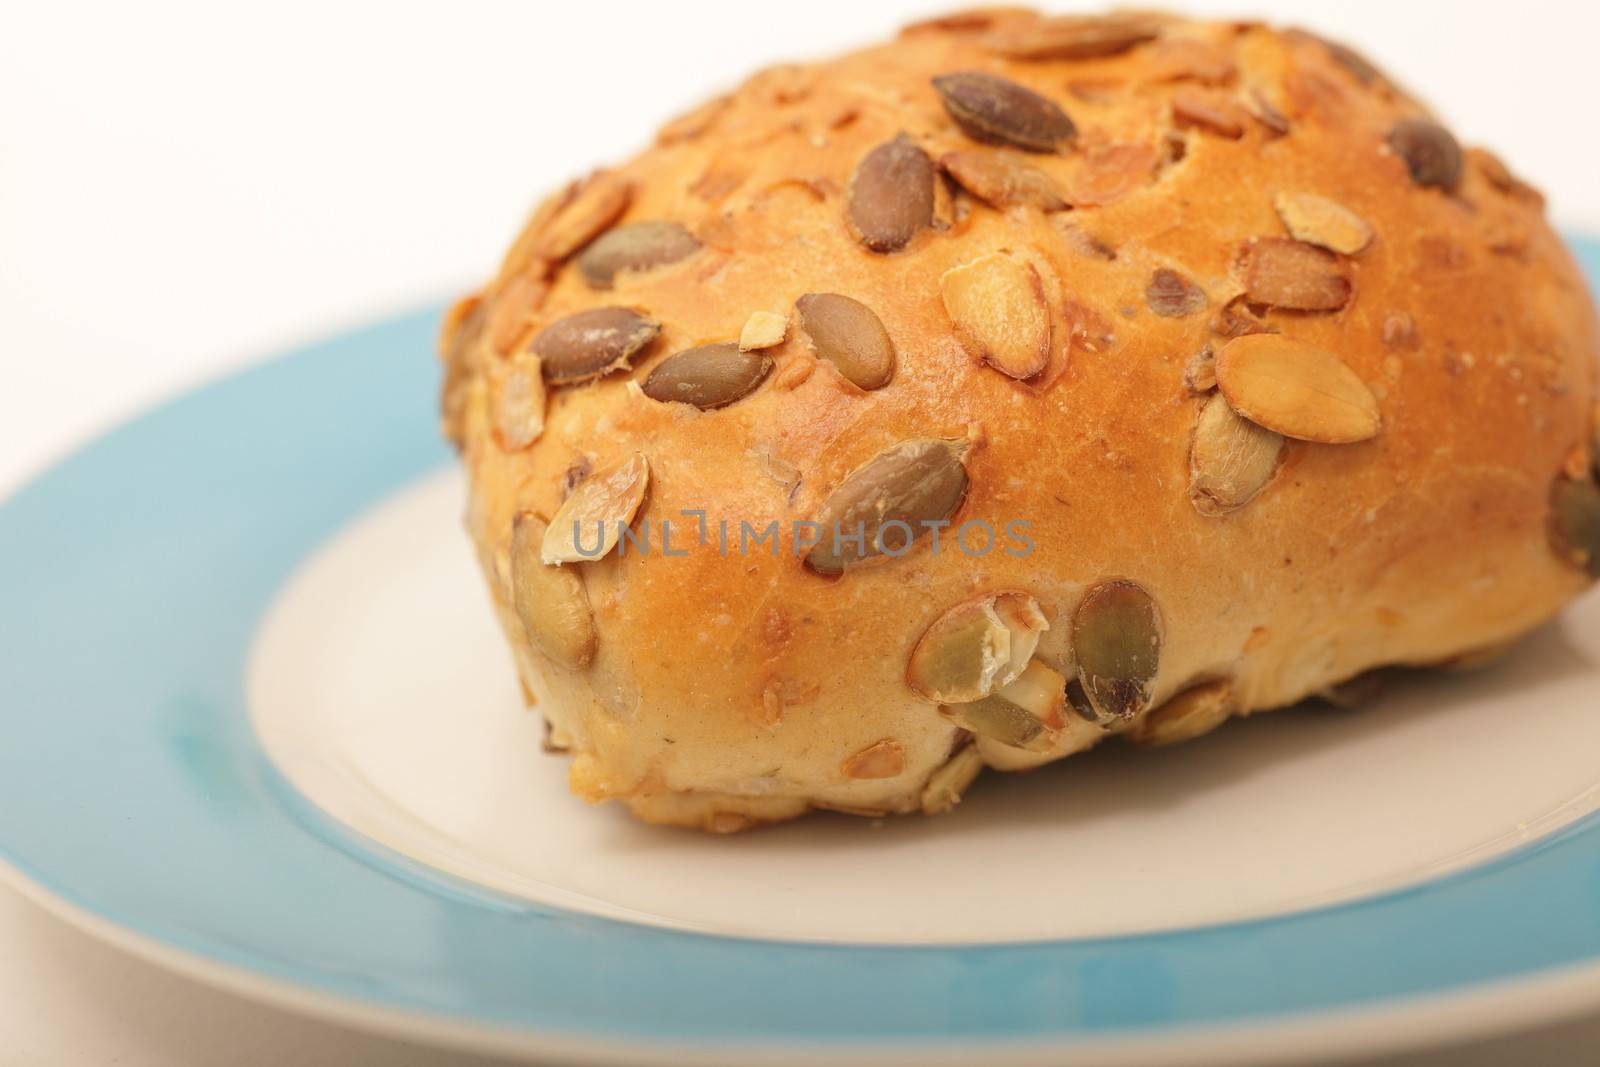 Freshly baked sunflower seed roll with a crisp golden crust served on a plate, close up view